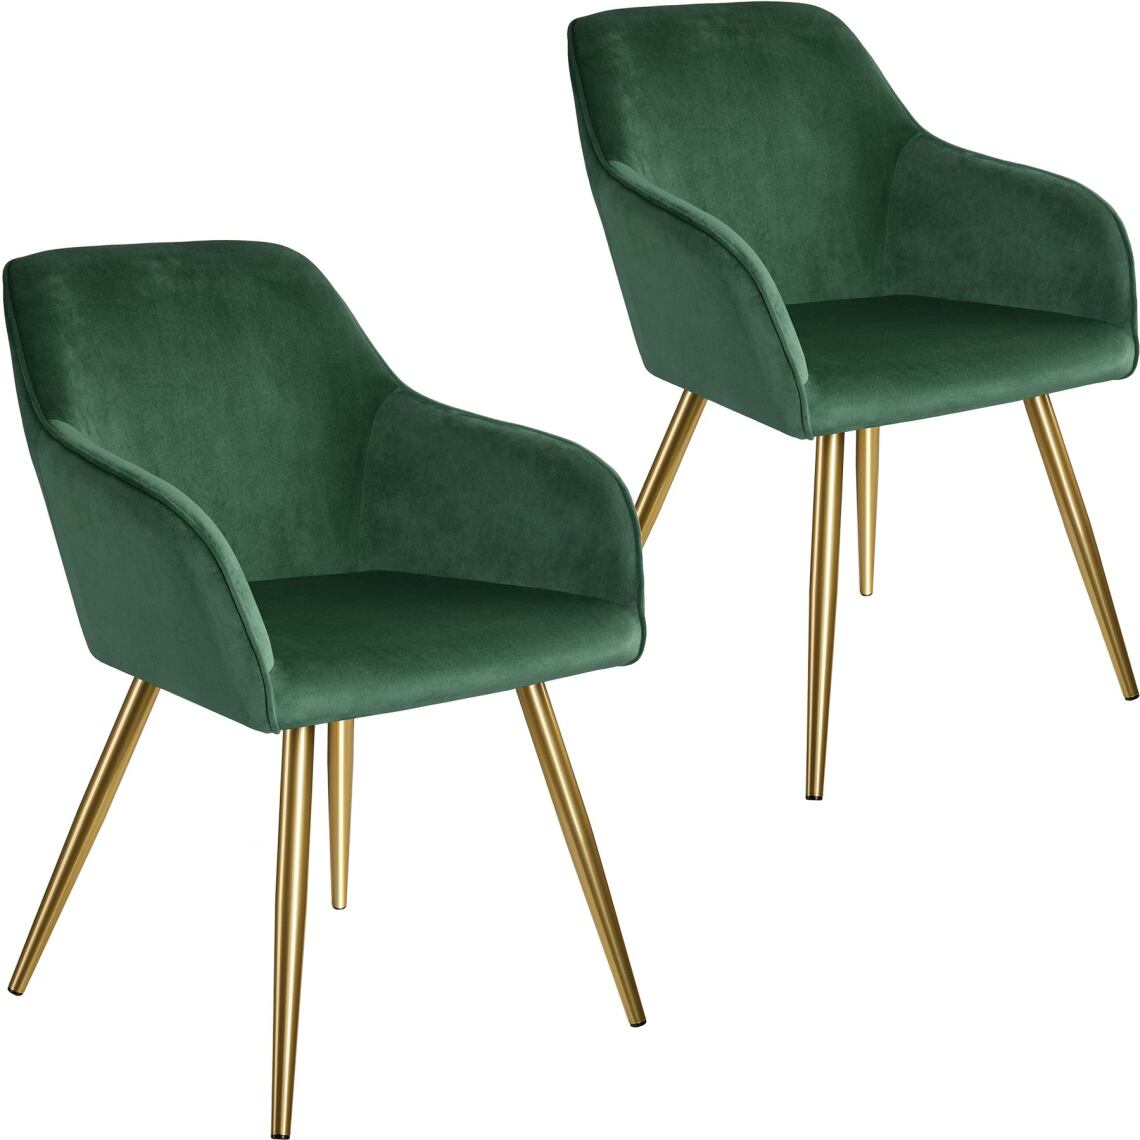 Tectake - 2 Chaises MARILYN Effet Velours Style Scandinave - vert foncé/or - Chaises